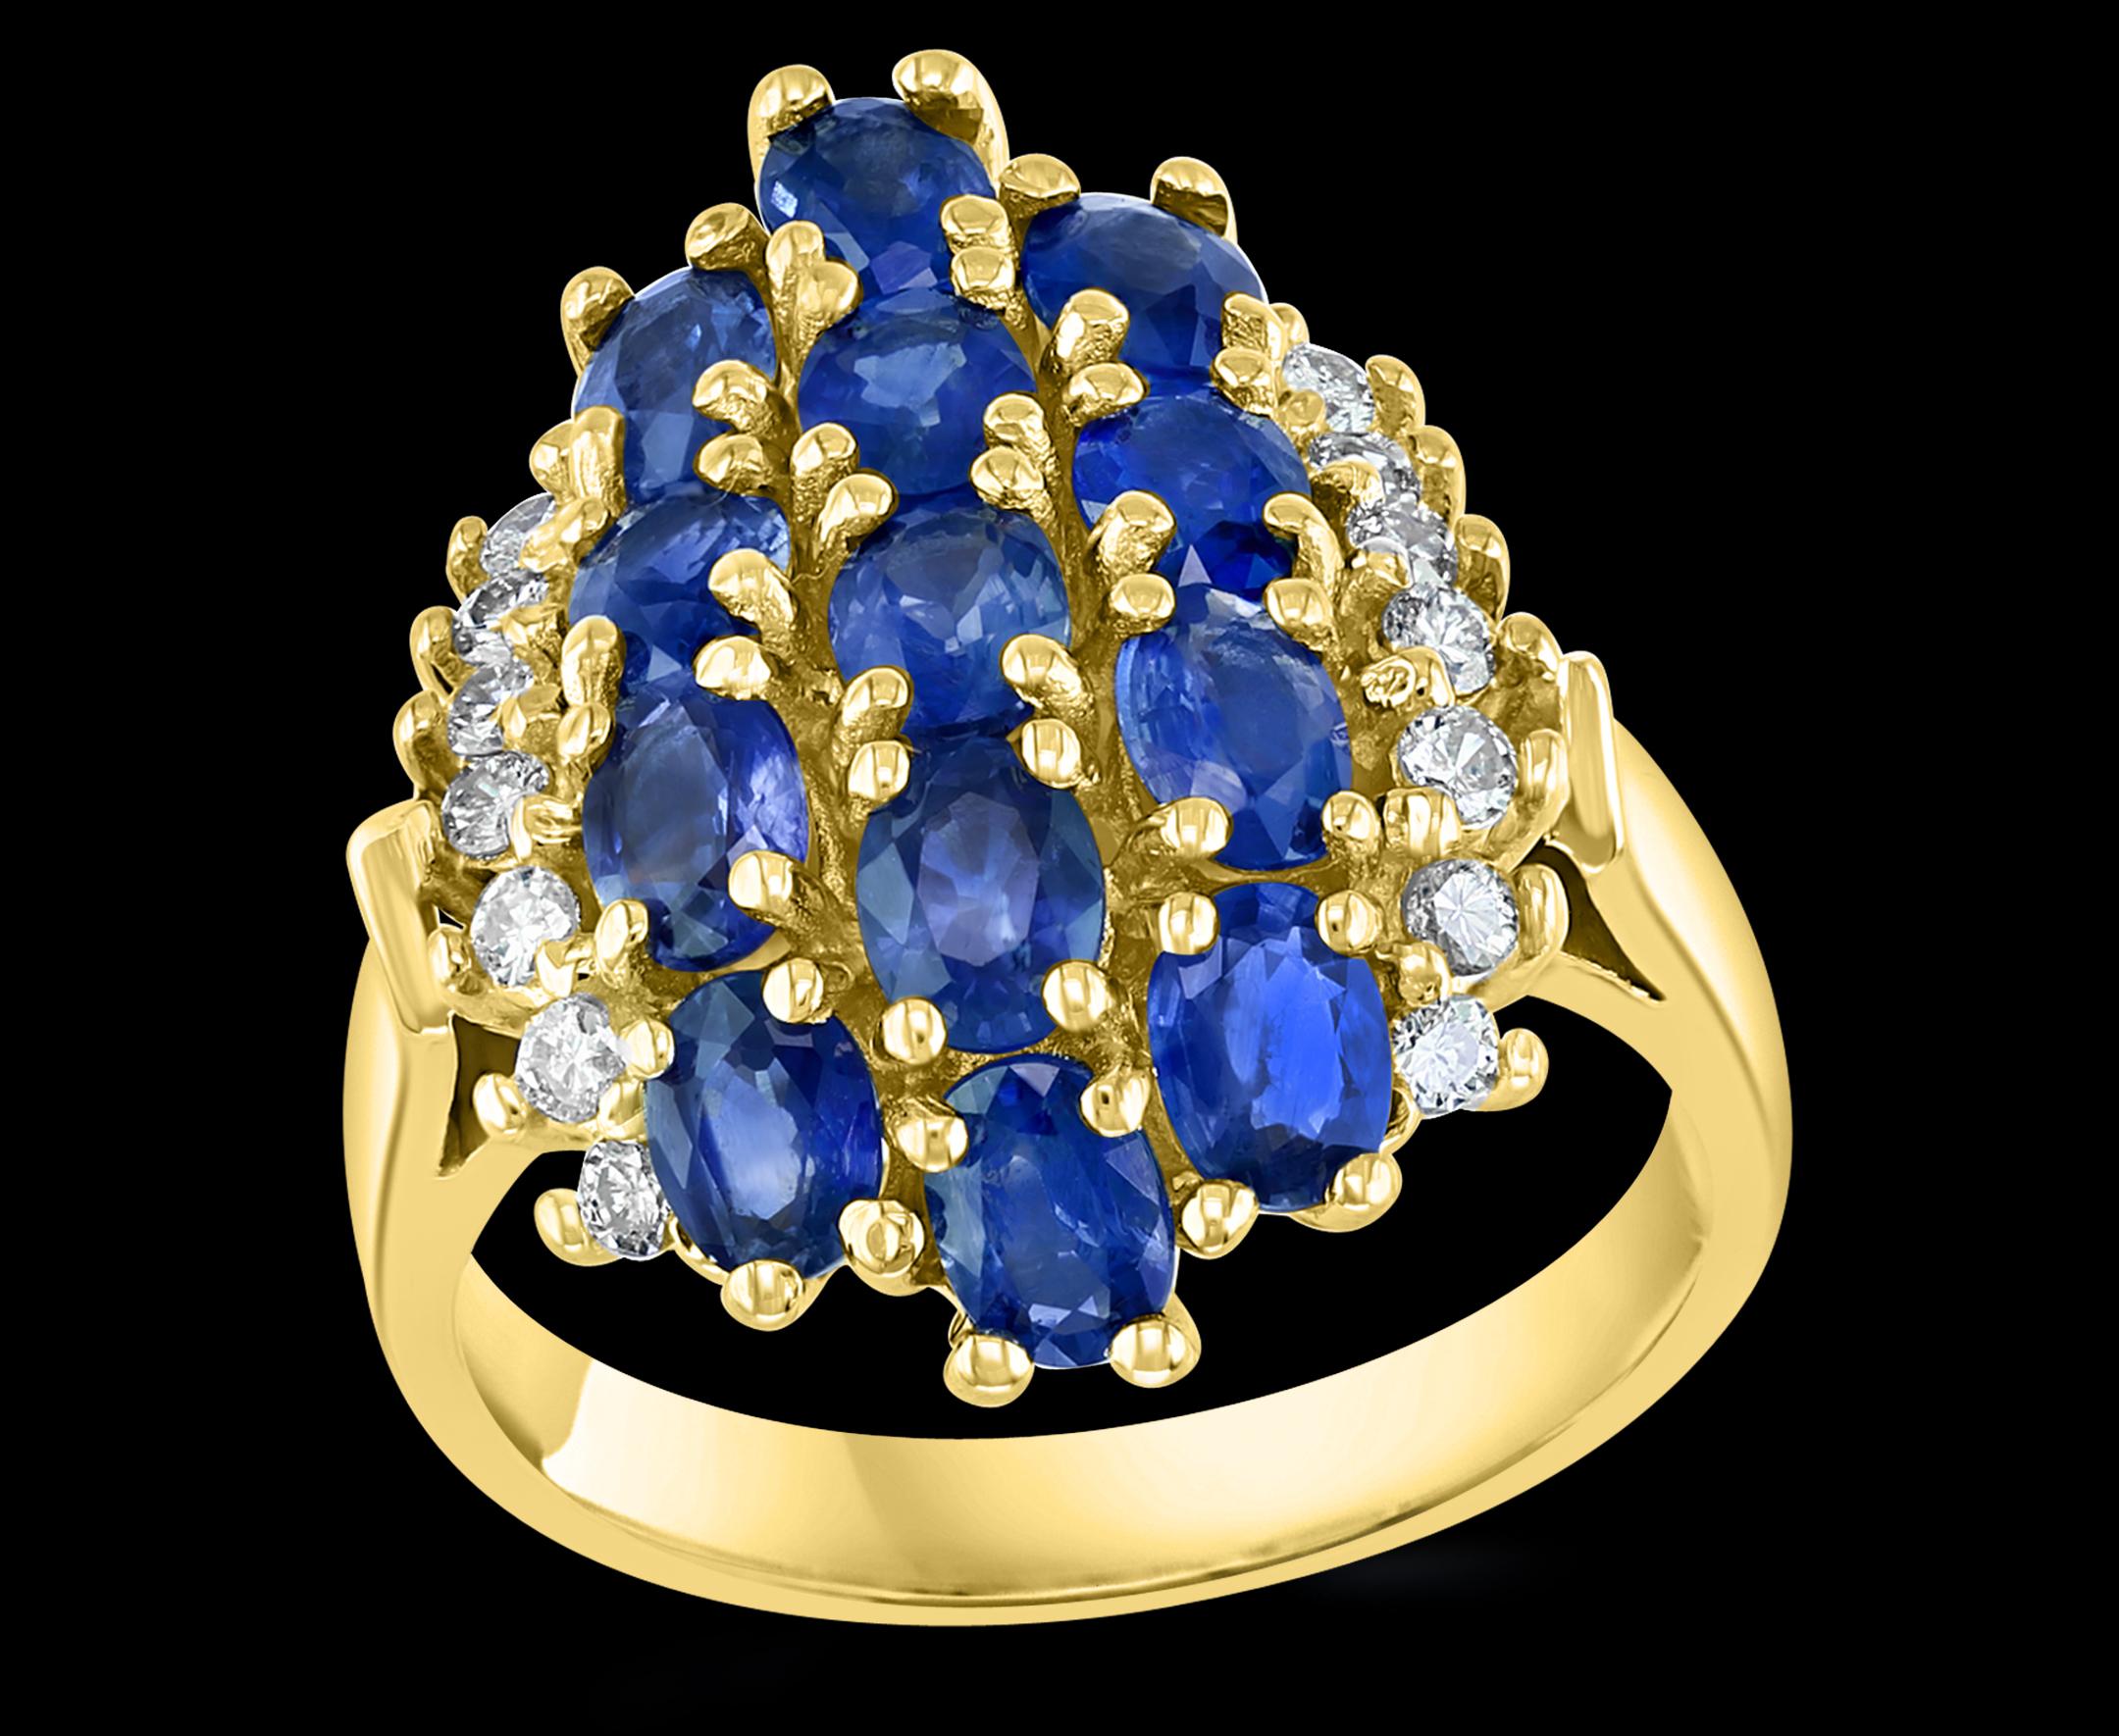 Approximately 2 Ct Oval Blue Sapphire &  Diamond Cocktail Ring in 14 Karat Yellow Gold Estate
three rows of oval  natural sapphires .
Round Brilliant cut diamonds on both side of the sapphires.
14 Karat yellow Gold 6 Grams
Ring Size 4.75 ( it can be